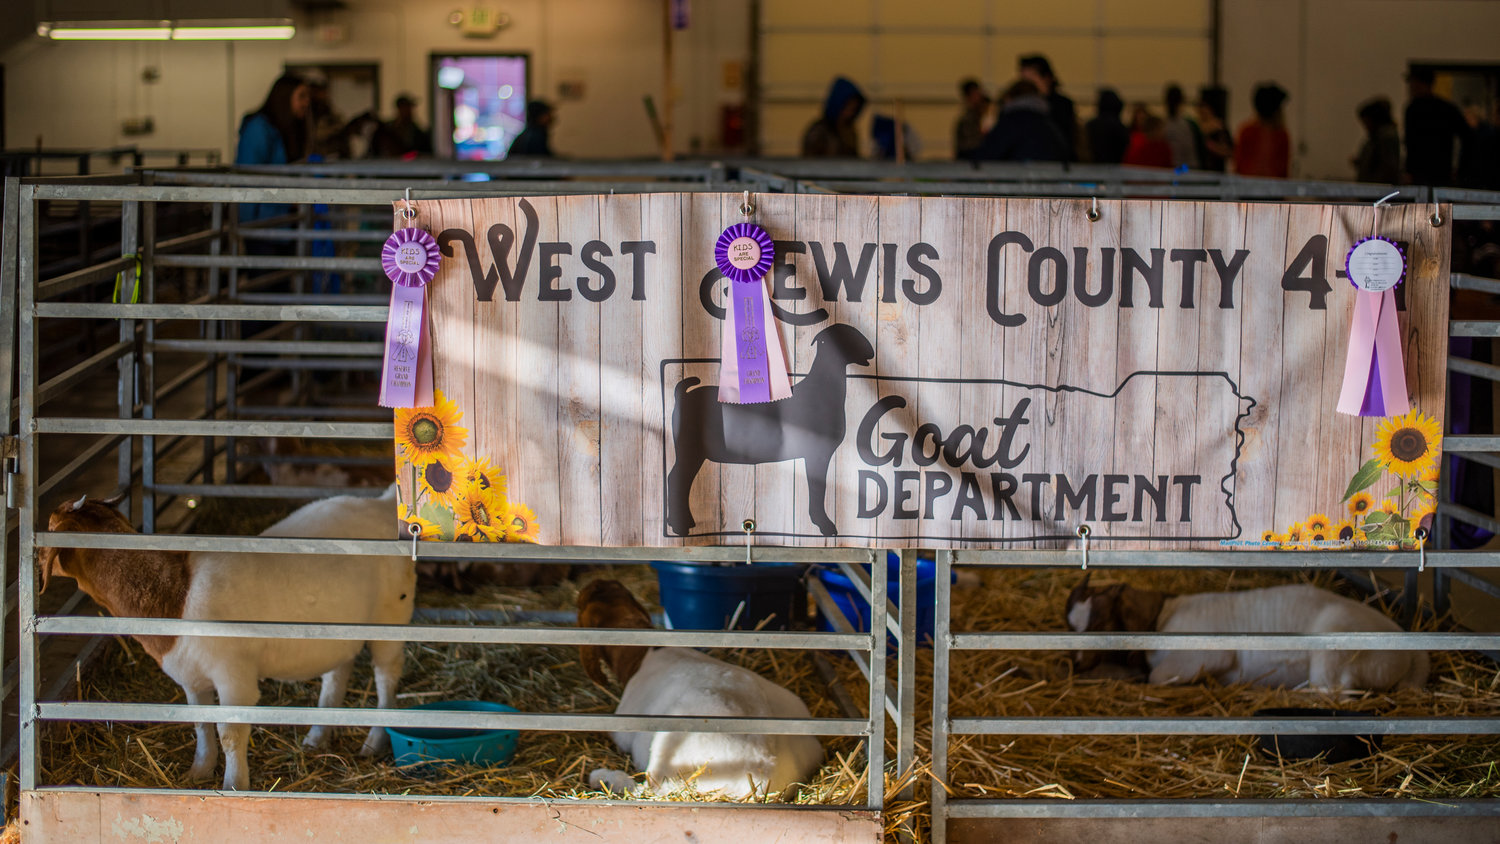 Ribbons hang from the West Lewis County 4-H Goat Department signage on display during the Spring Youth Fair Saturday in Centralia.